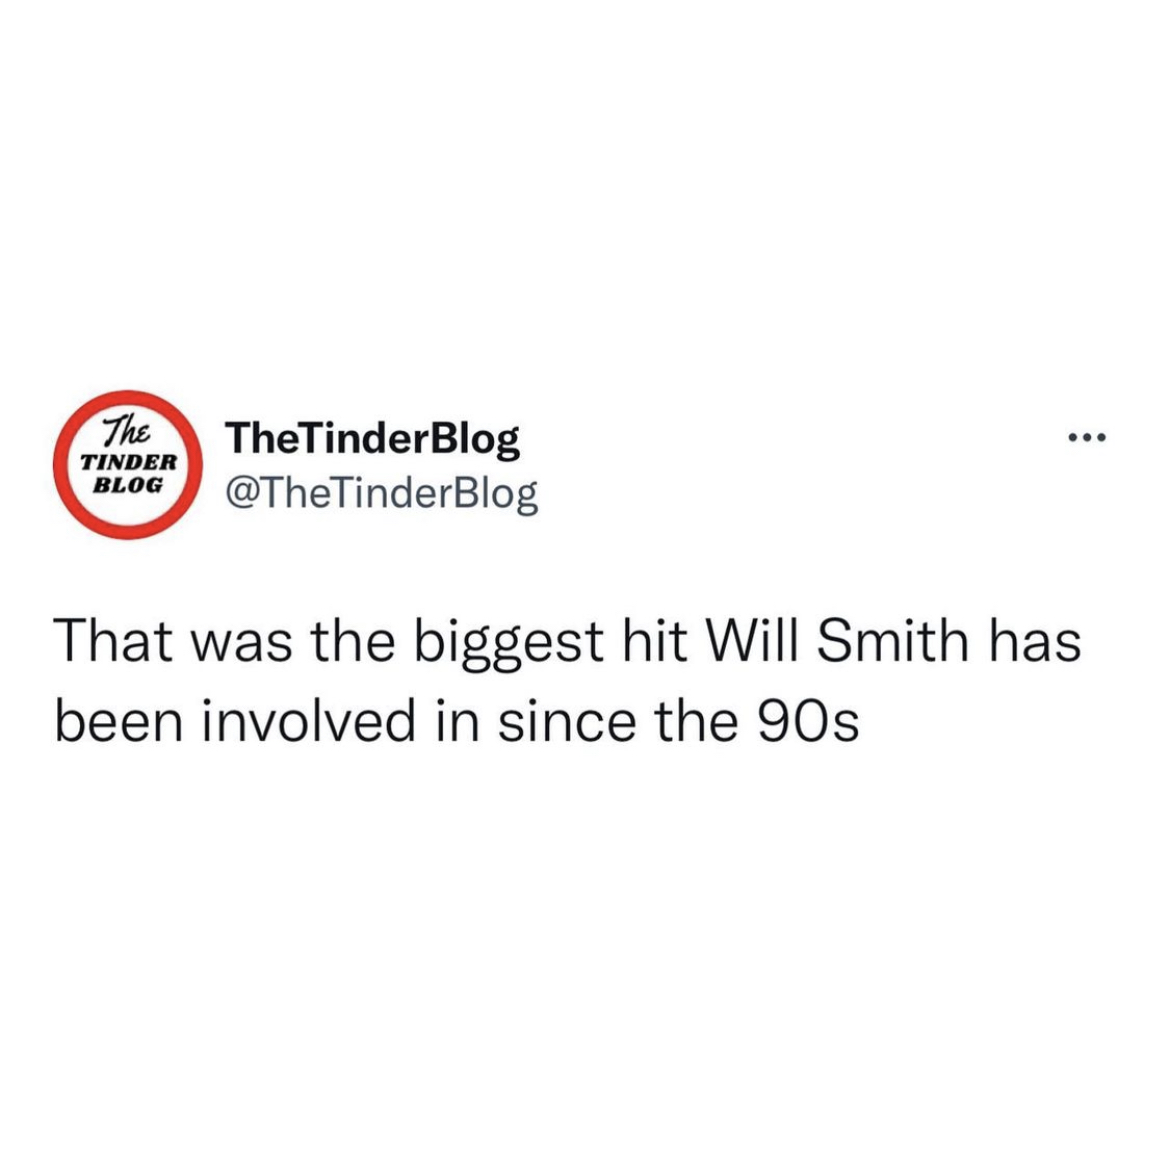 Will Smith Slap memes - outburst i had at joann fabrics - The ... Tinder Blog TheTinder Blog That was the biggest hit Will Smith has been involved in since the 90s